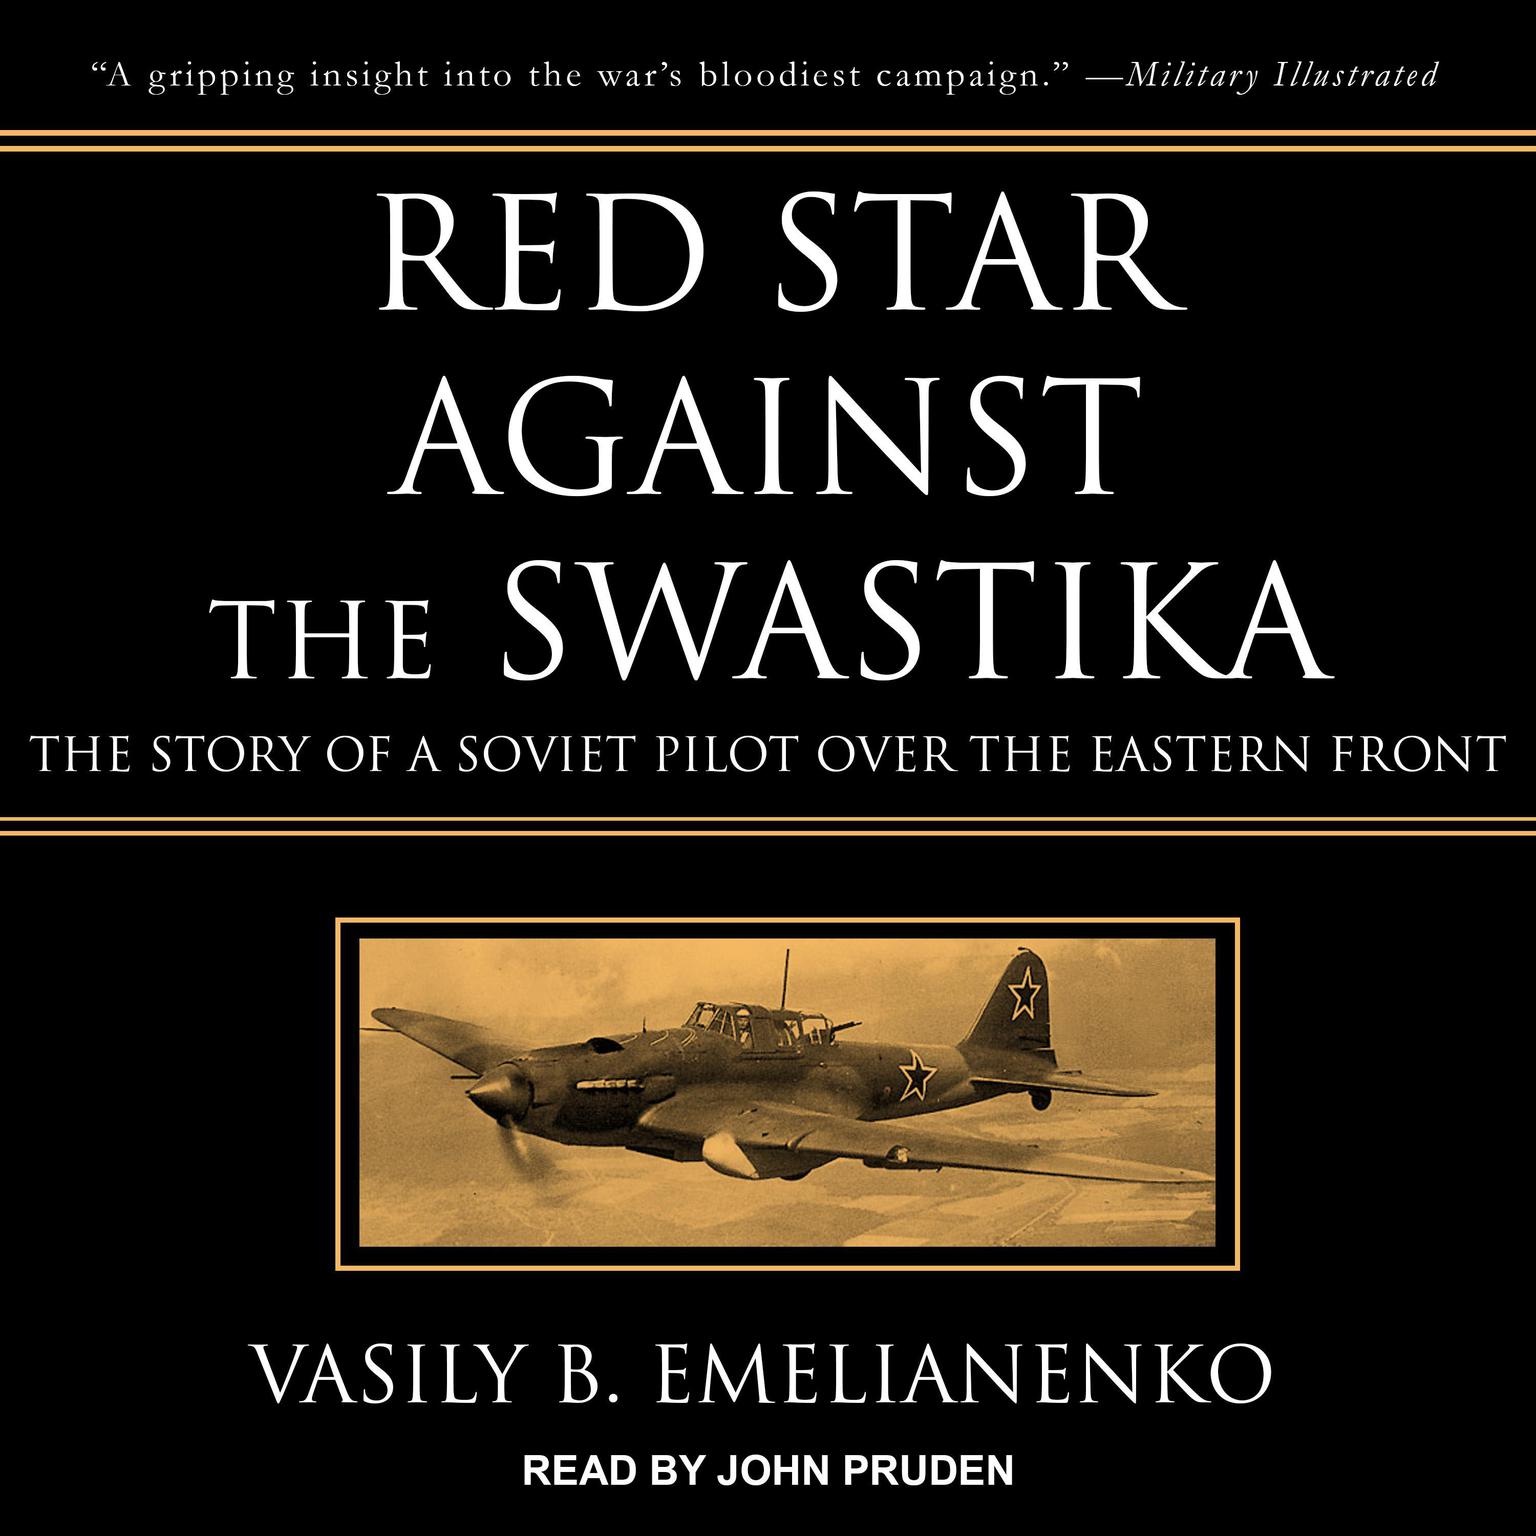 Red Star Against the Swastika: The Story of a Soviet Pilot over the Eastern Front Audiobook, by Vasily B. Emelianenko